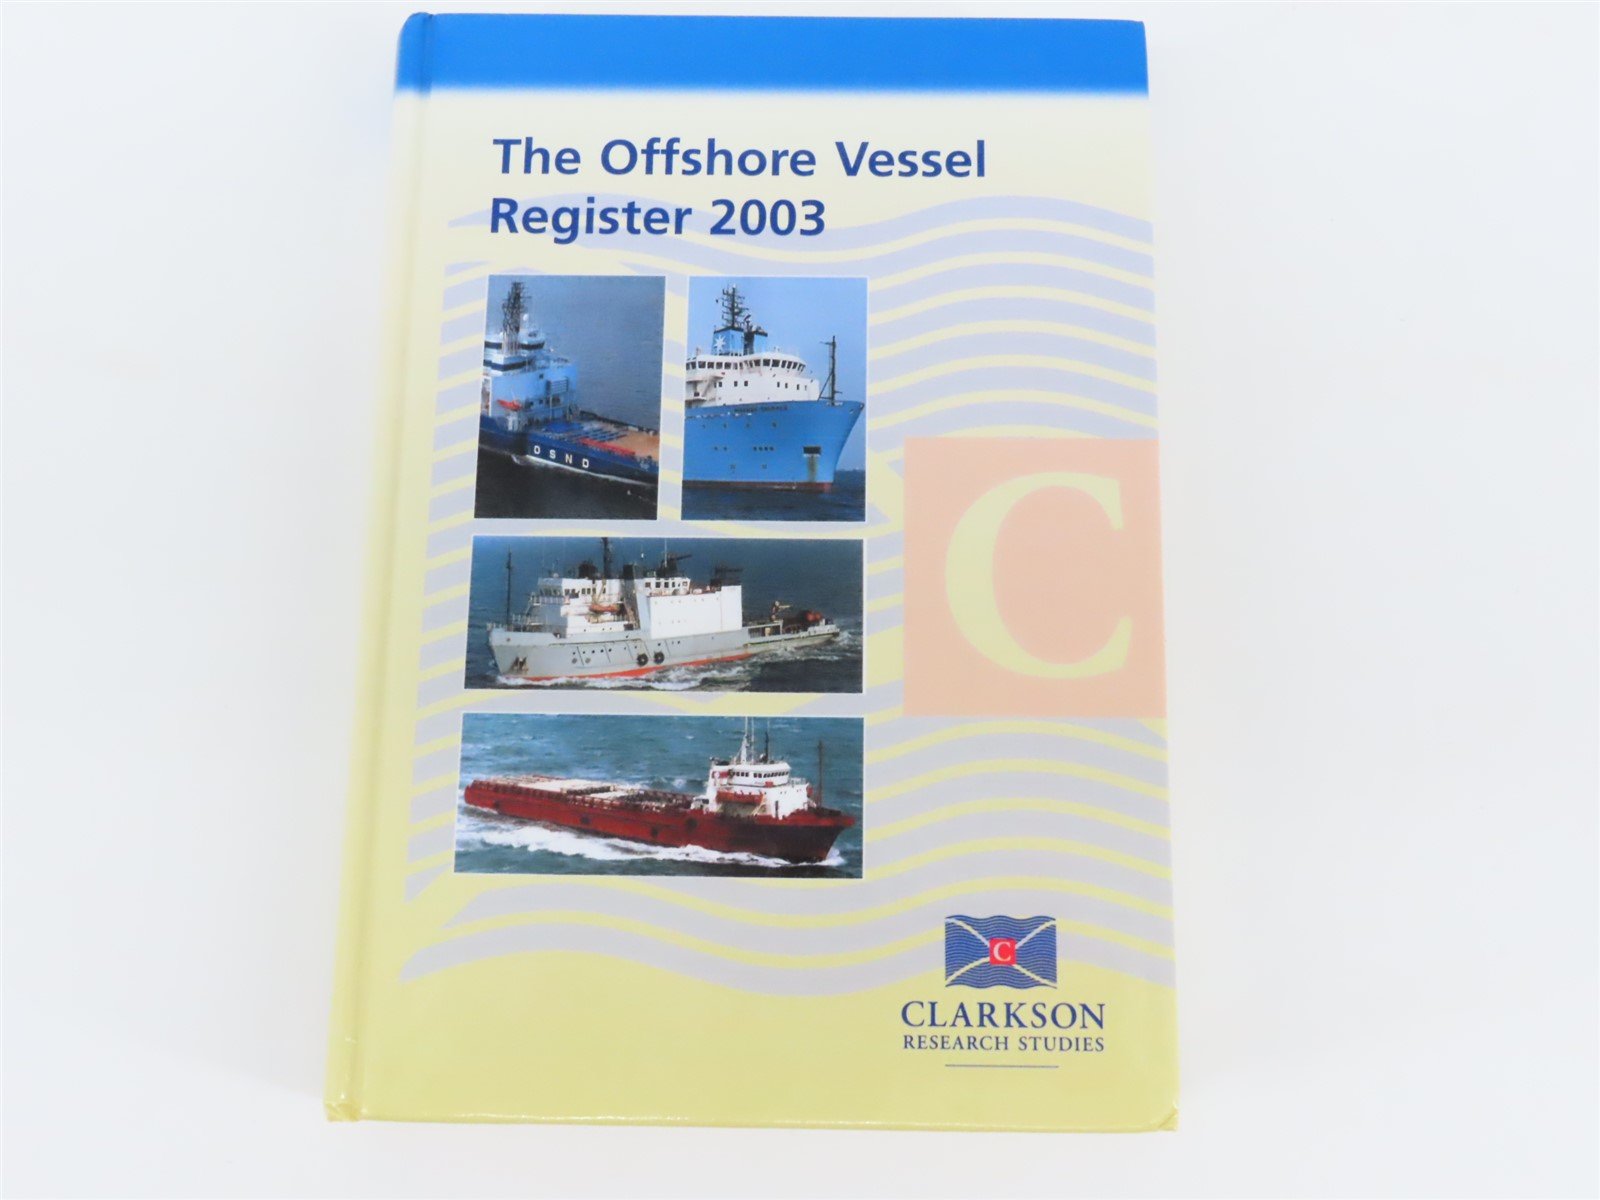 The Offshore Service Vessel Register 2003 by Clarkson Research Studies ©2003 HC